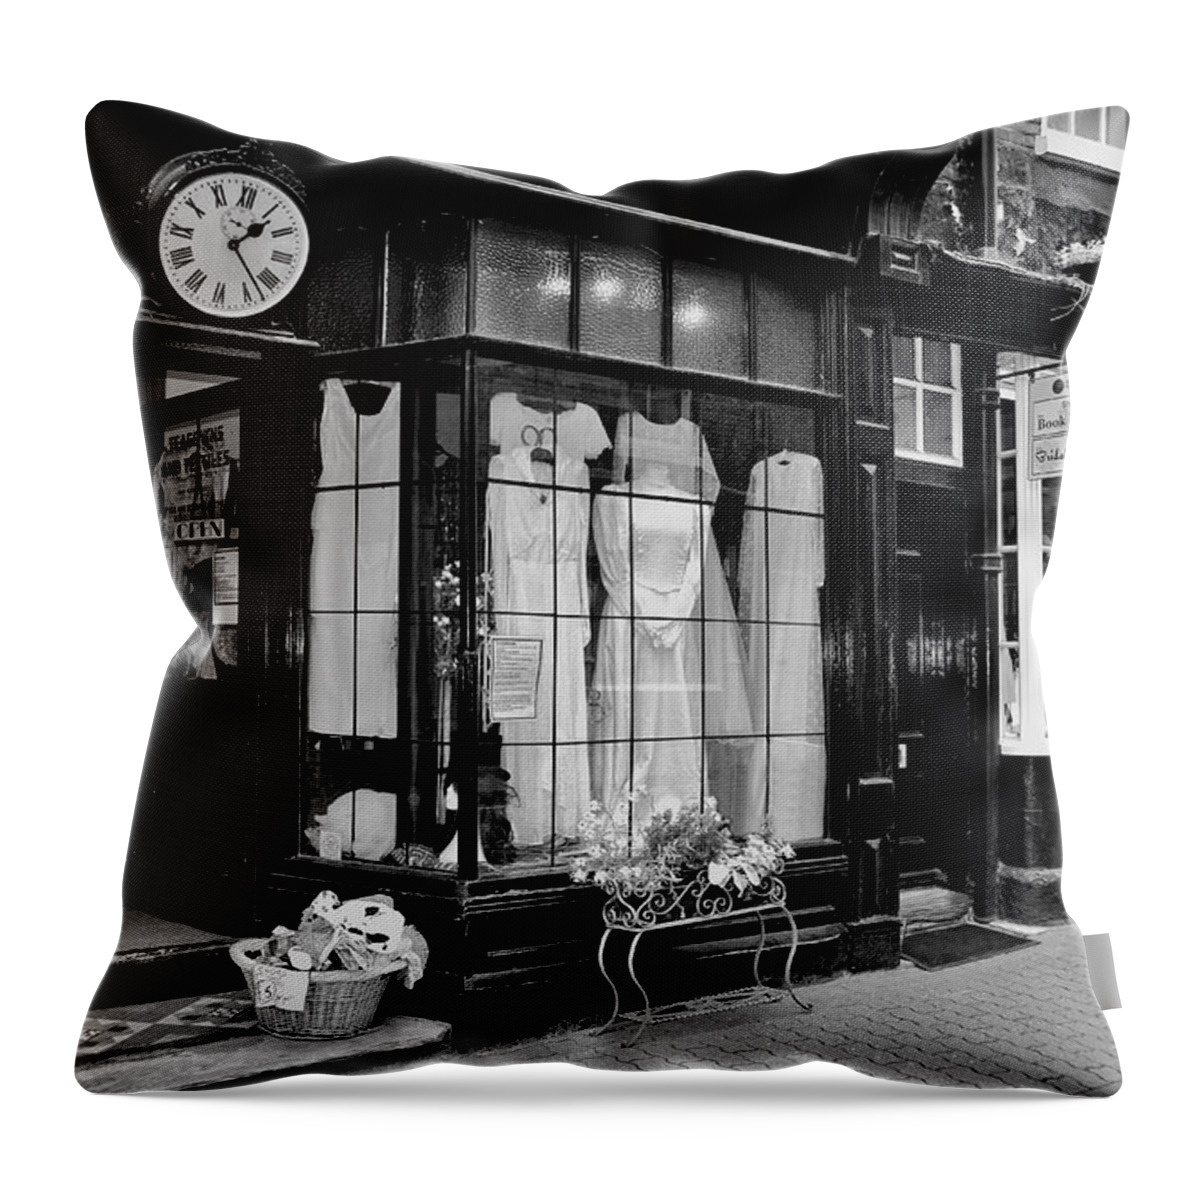 Vintage Throw Pillow featuring the photograph Back In Time by Pennie McCracken